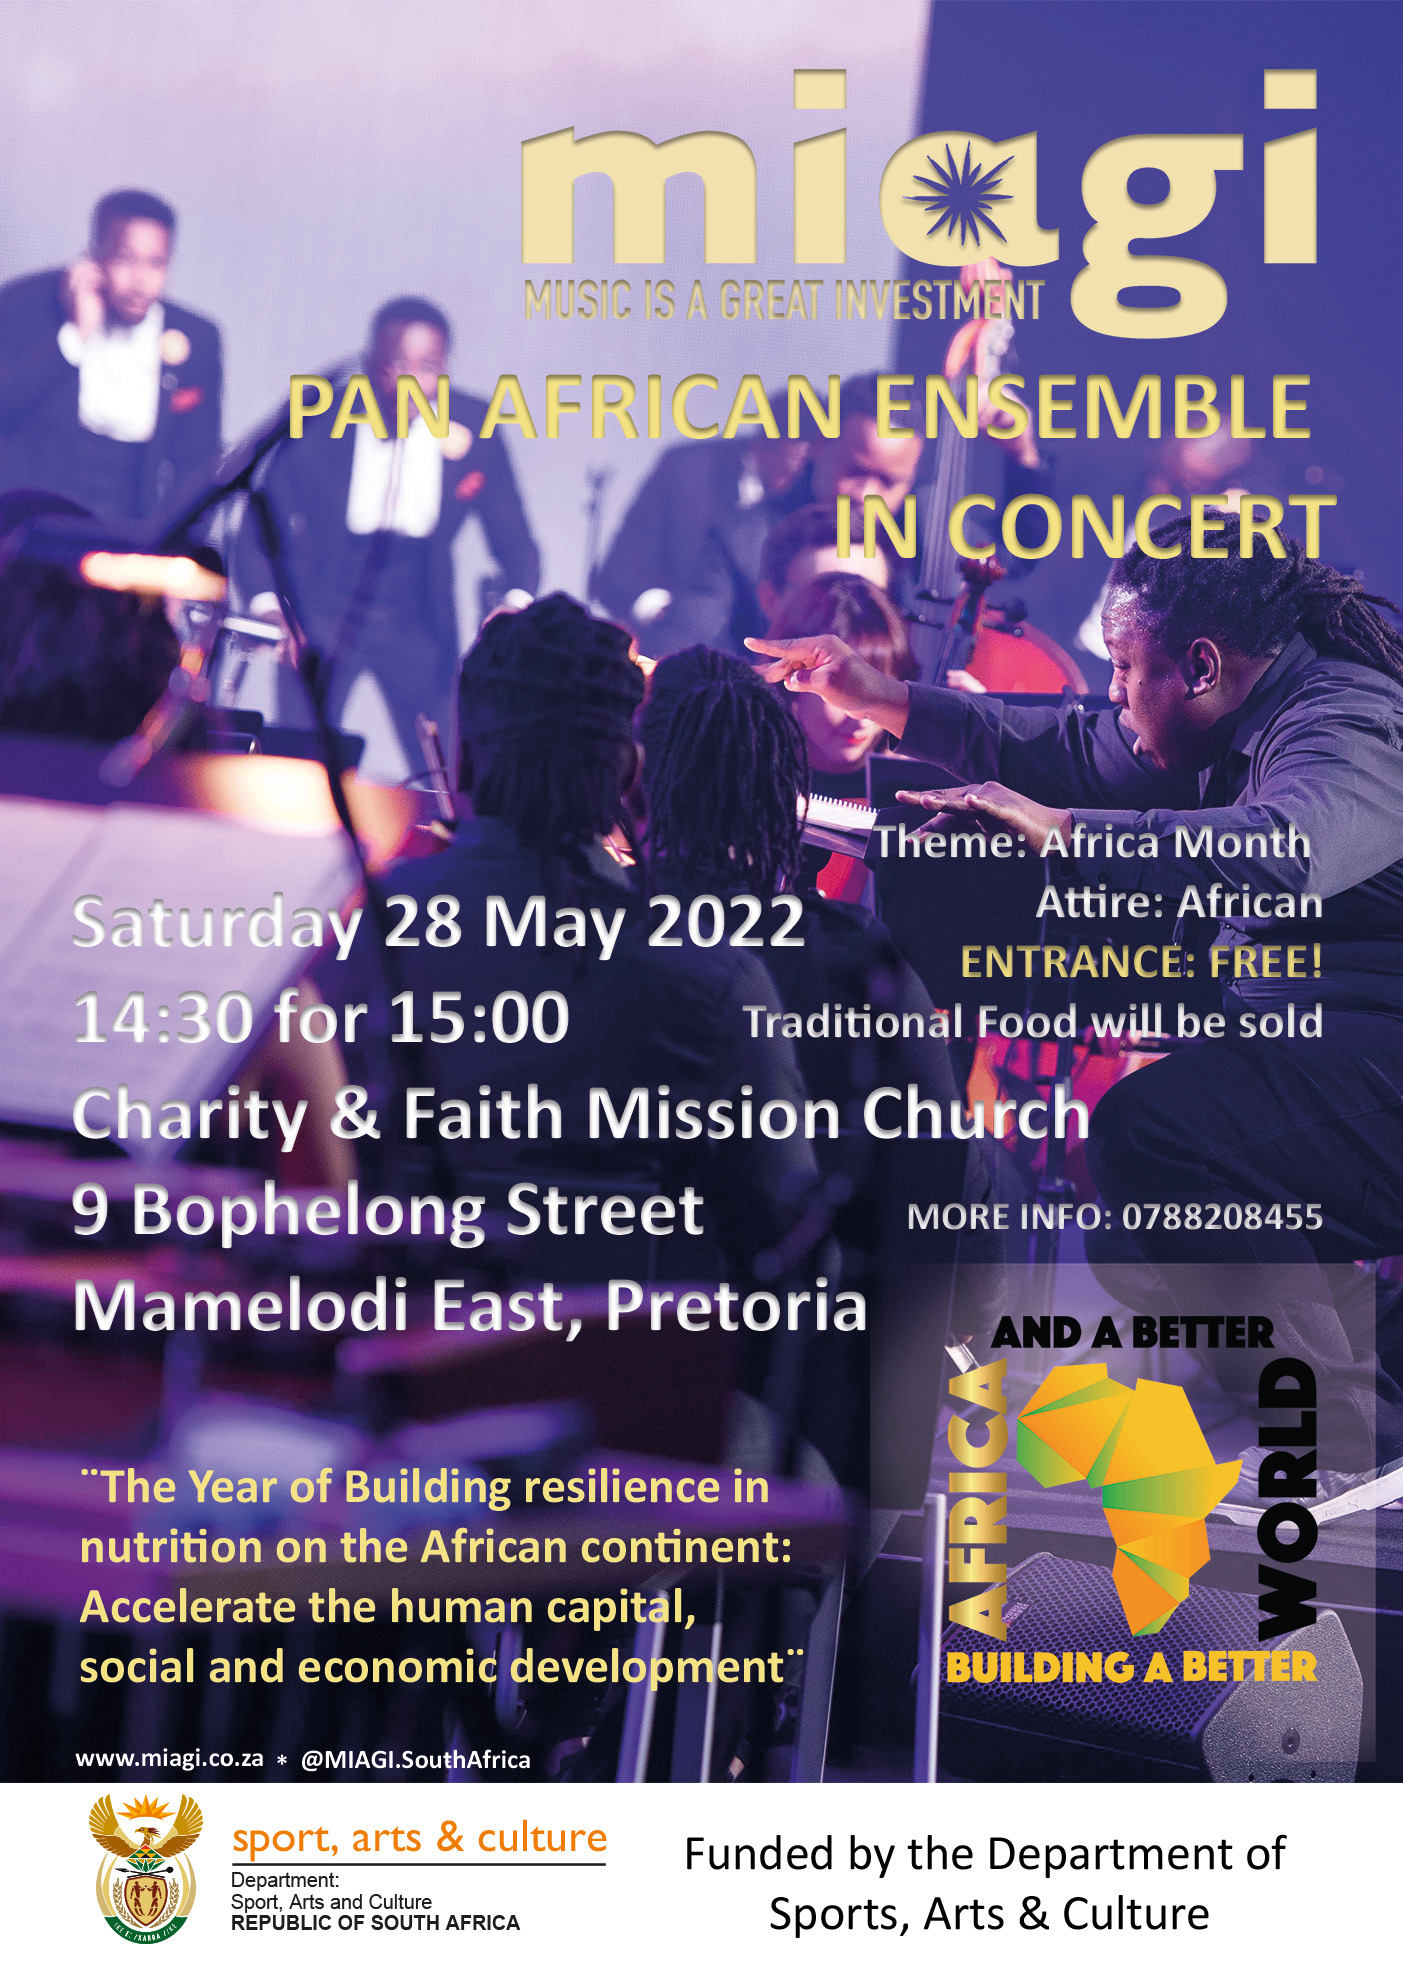 MIAGI Pan African Ensemble in Mamelodi for Africa Month